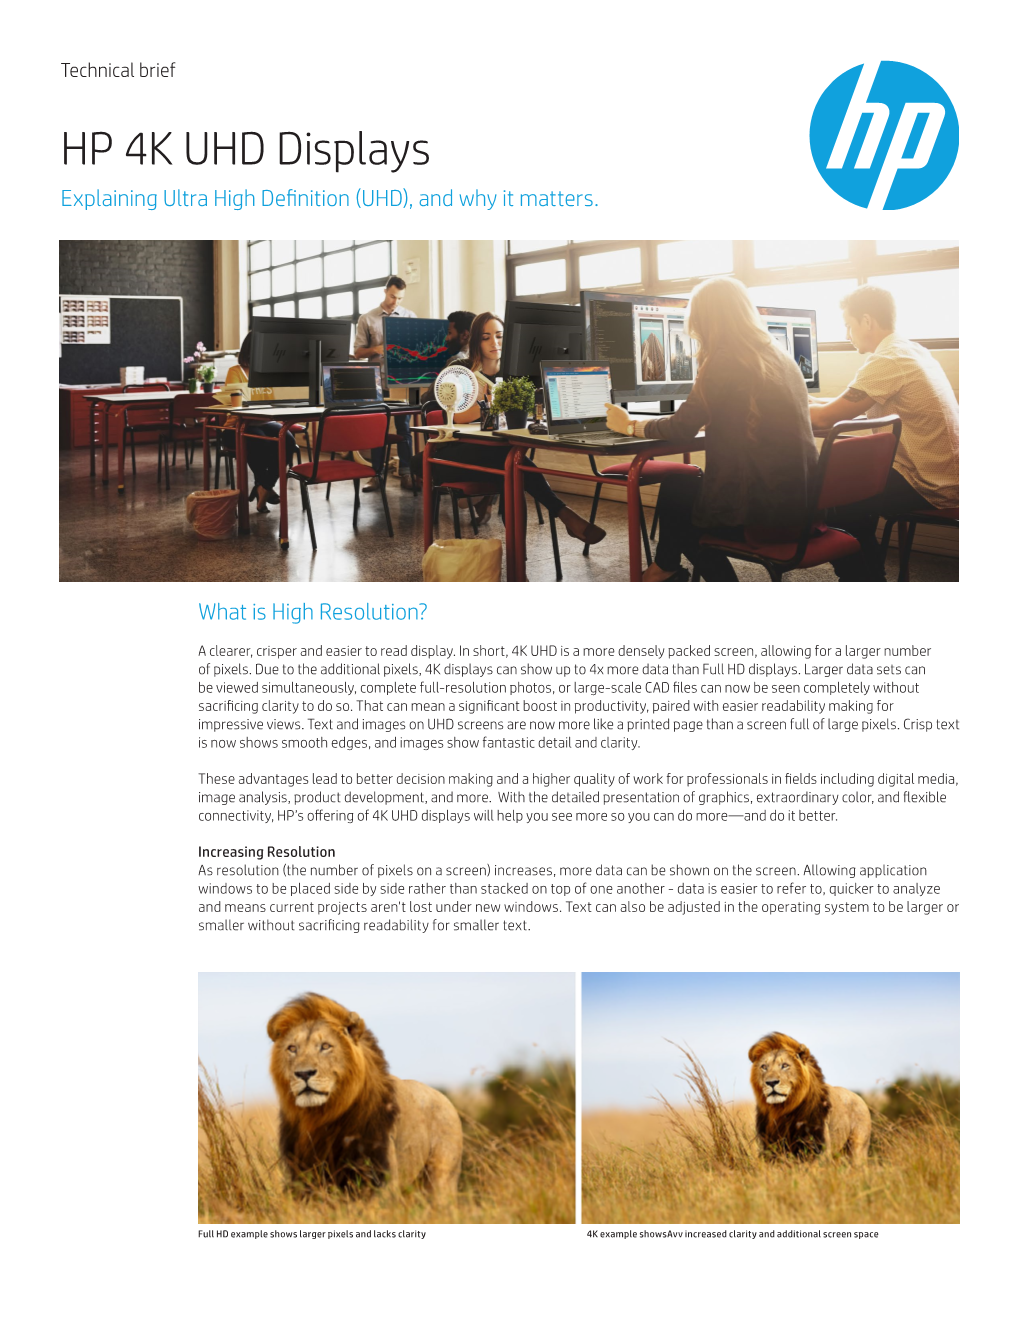 HP 4K UHD Displays Explaining Ultra High Definition (UHD), and Why It Matters